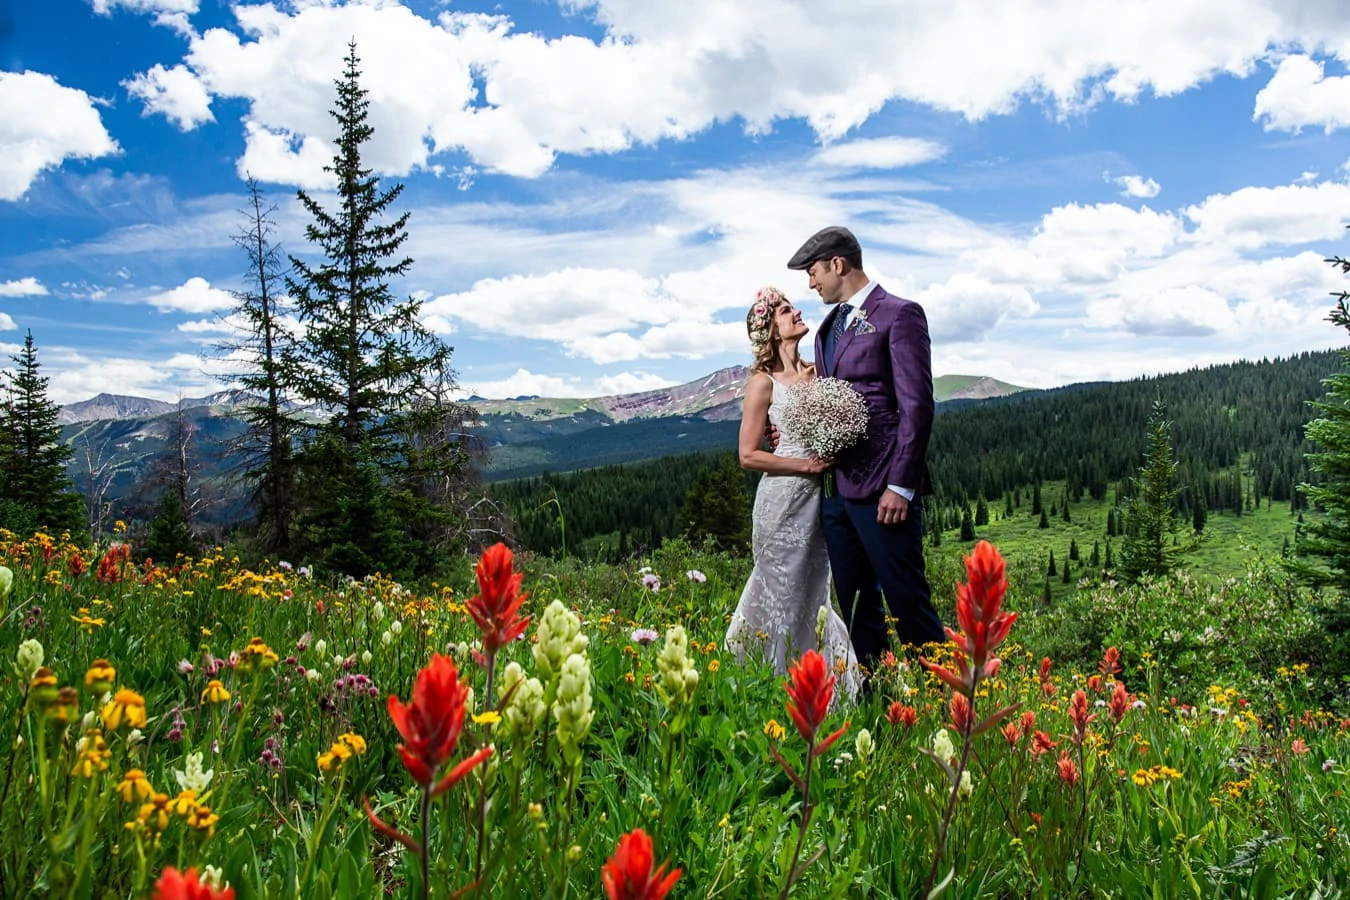 A bride wearing a flower crown looks up at the groom wearing a purple suit, surrounded by red, yellow and white wildflowers in Vail, Colorado with mountains in the background.